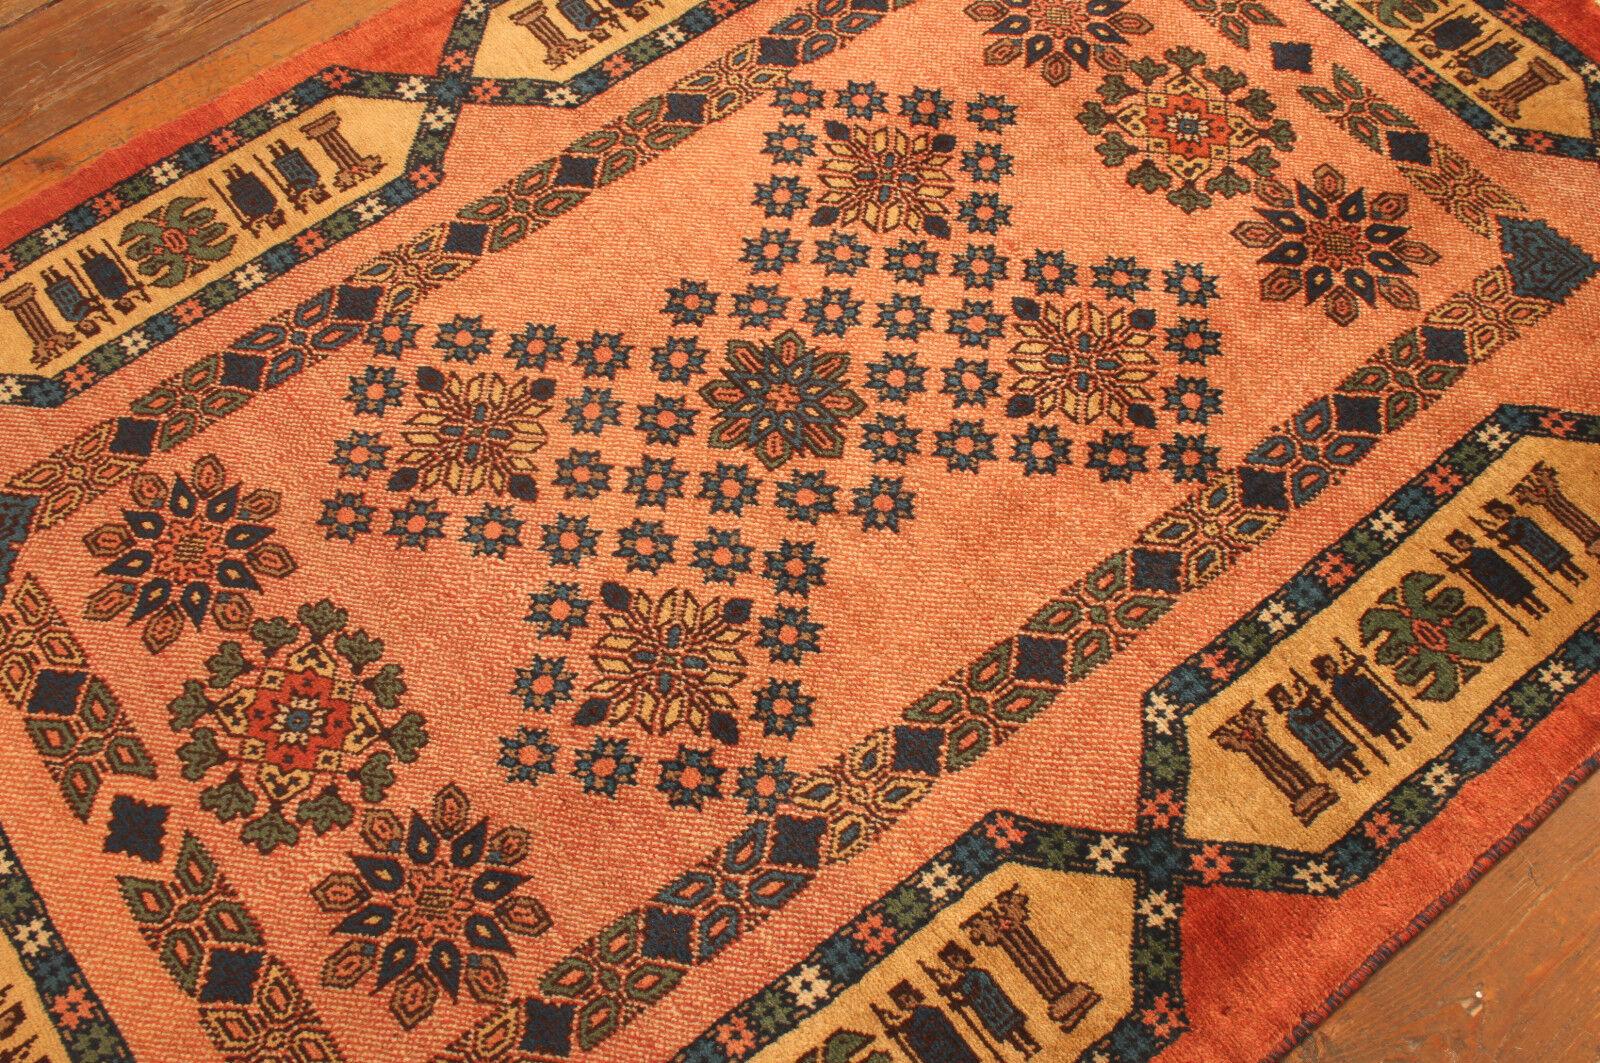 Discover the charm of a bygone era with this vintage handmade rug, crafted in the 1990s. This Persian Style Yalameh area rug is a testament to the artistry and craftsmanship of its weavers. Made entirely of high-quality wool, it is in good